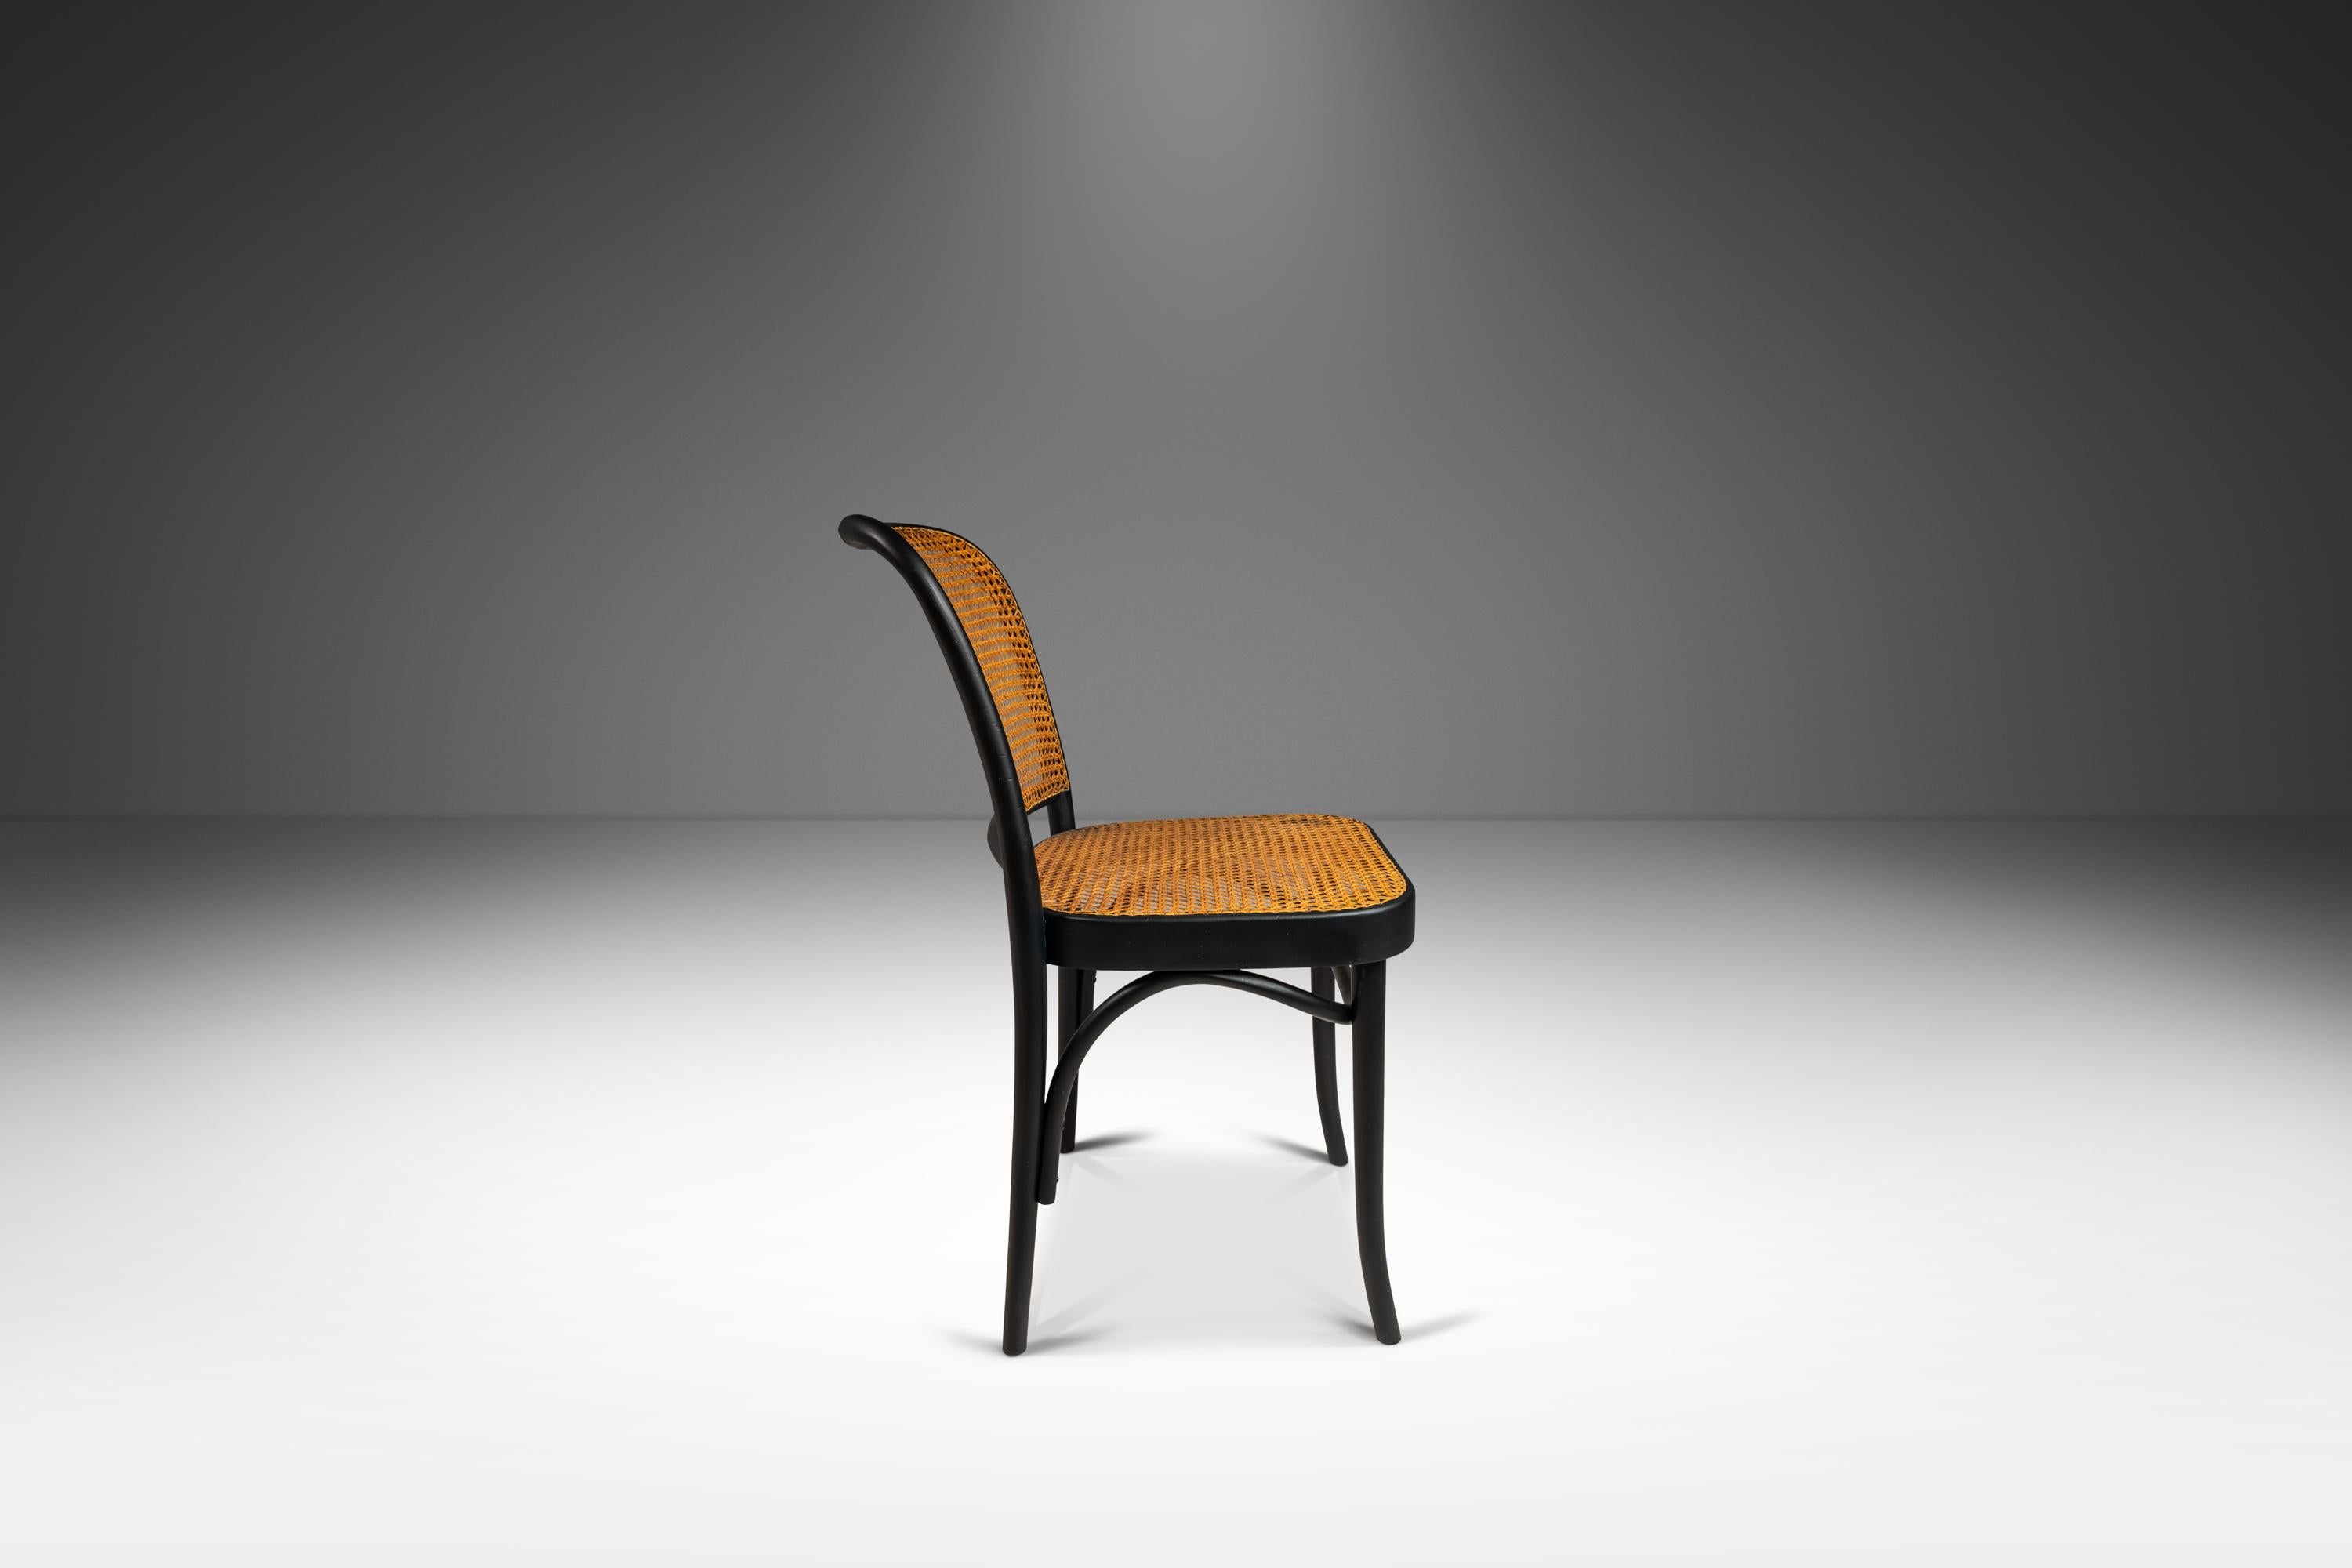  Introducing a rare and beautiful single bentwood Prague Model 811 side chair by the renowned designers Josef Frank and Josef Hoffmann for Stendig. Designed in the 1960s, this chair is a true representation of mid-century modern design and